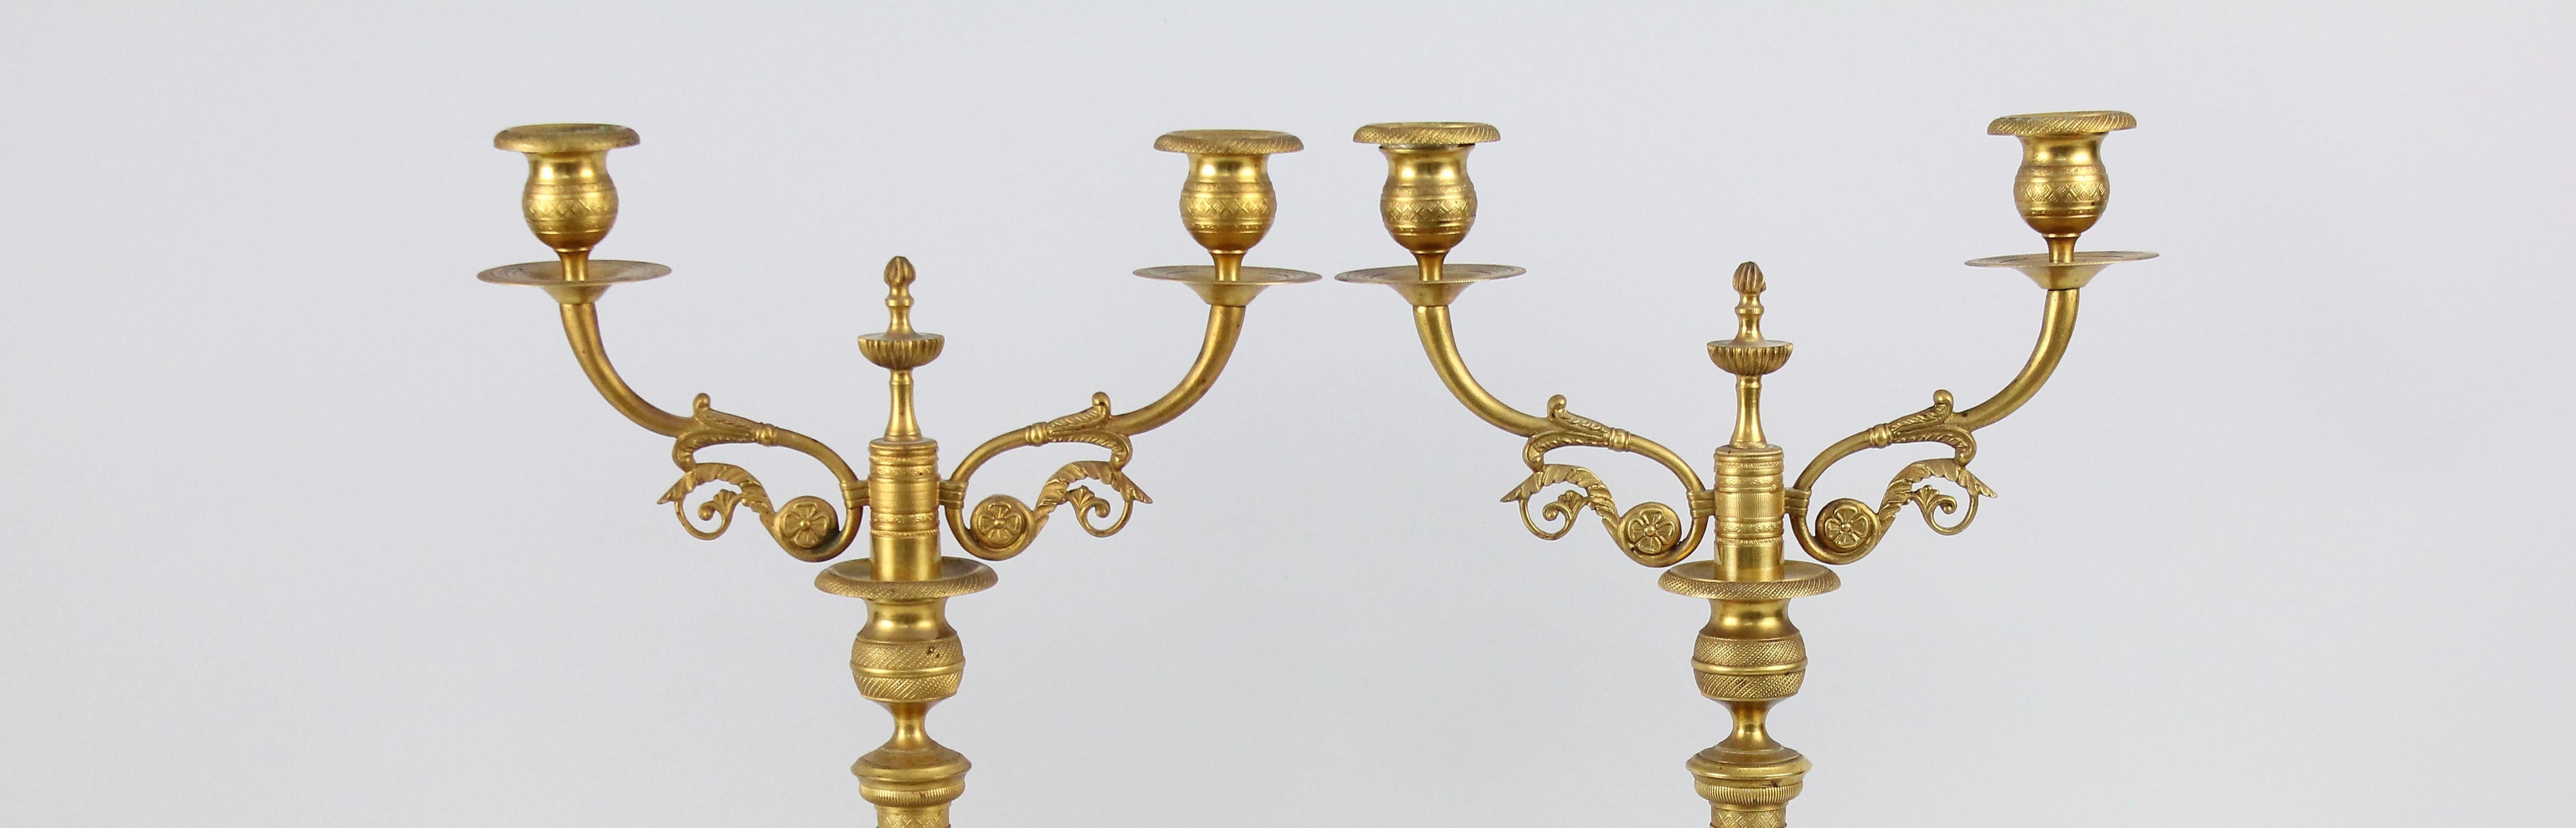 Gilt Pair of 19th Century Bronze Candelabras For Sale